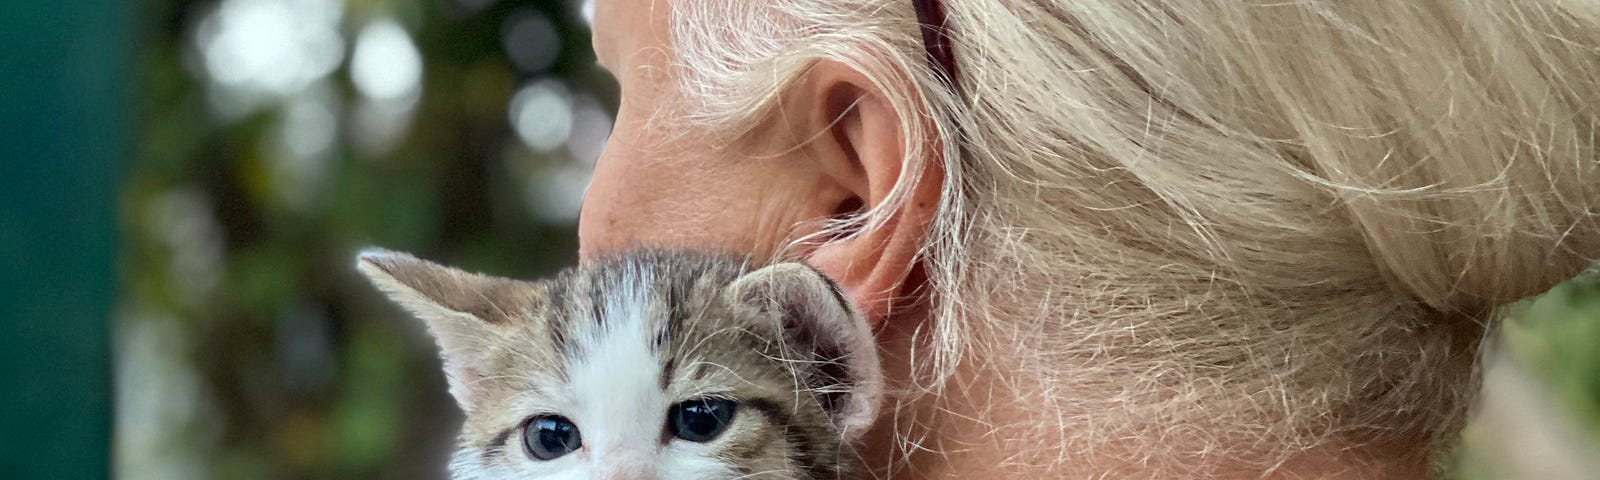 A blond female holding a white kitten on her shoulder.